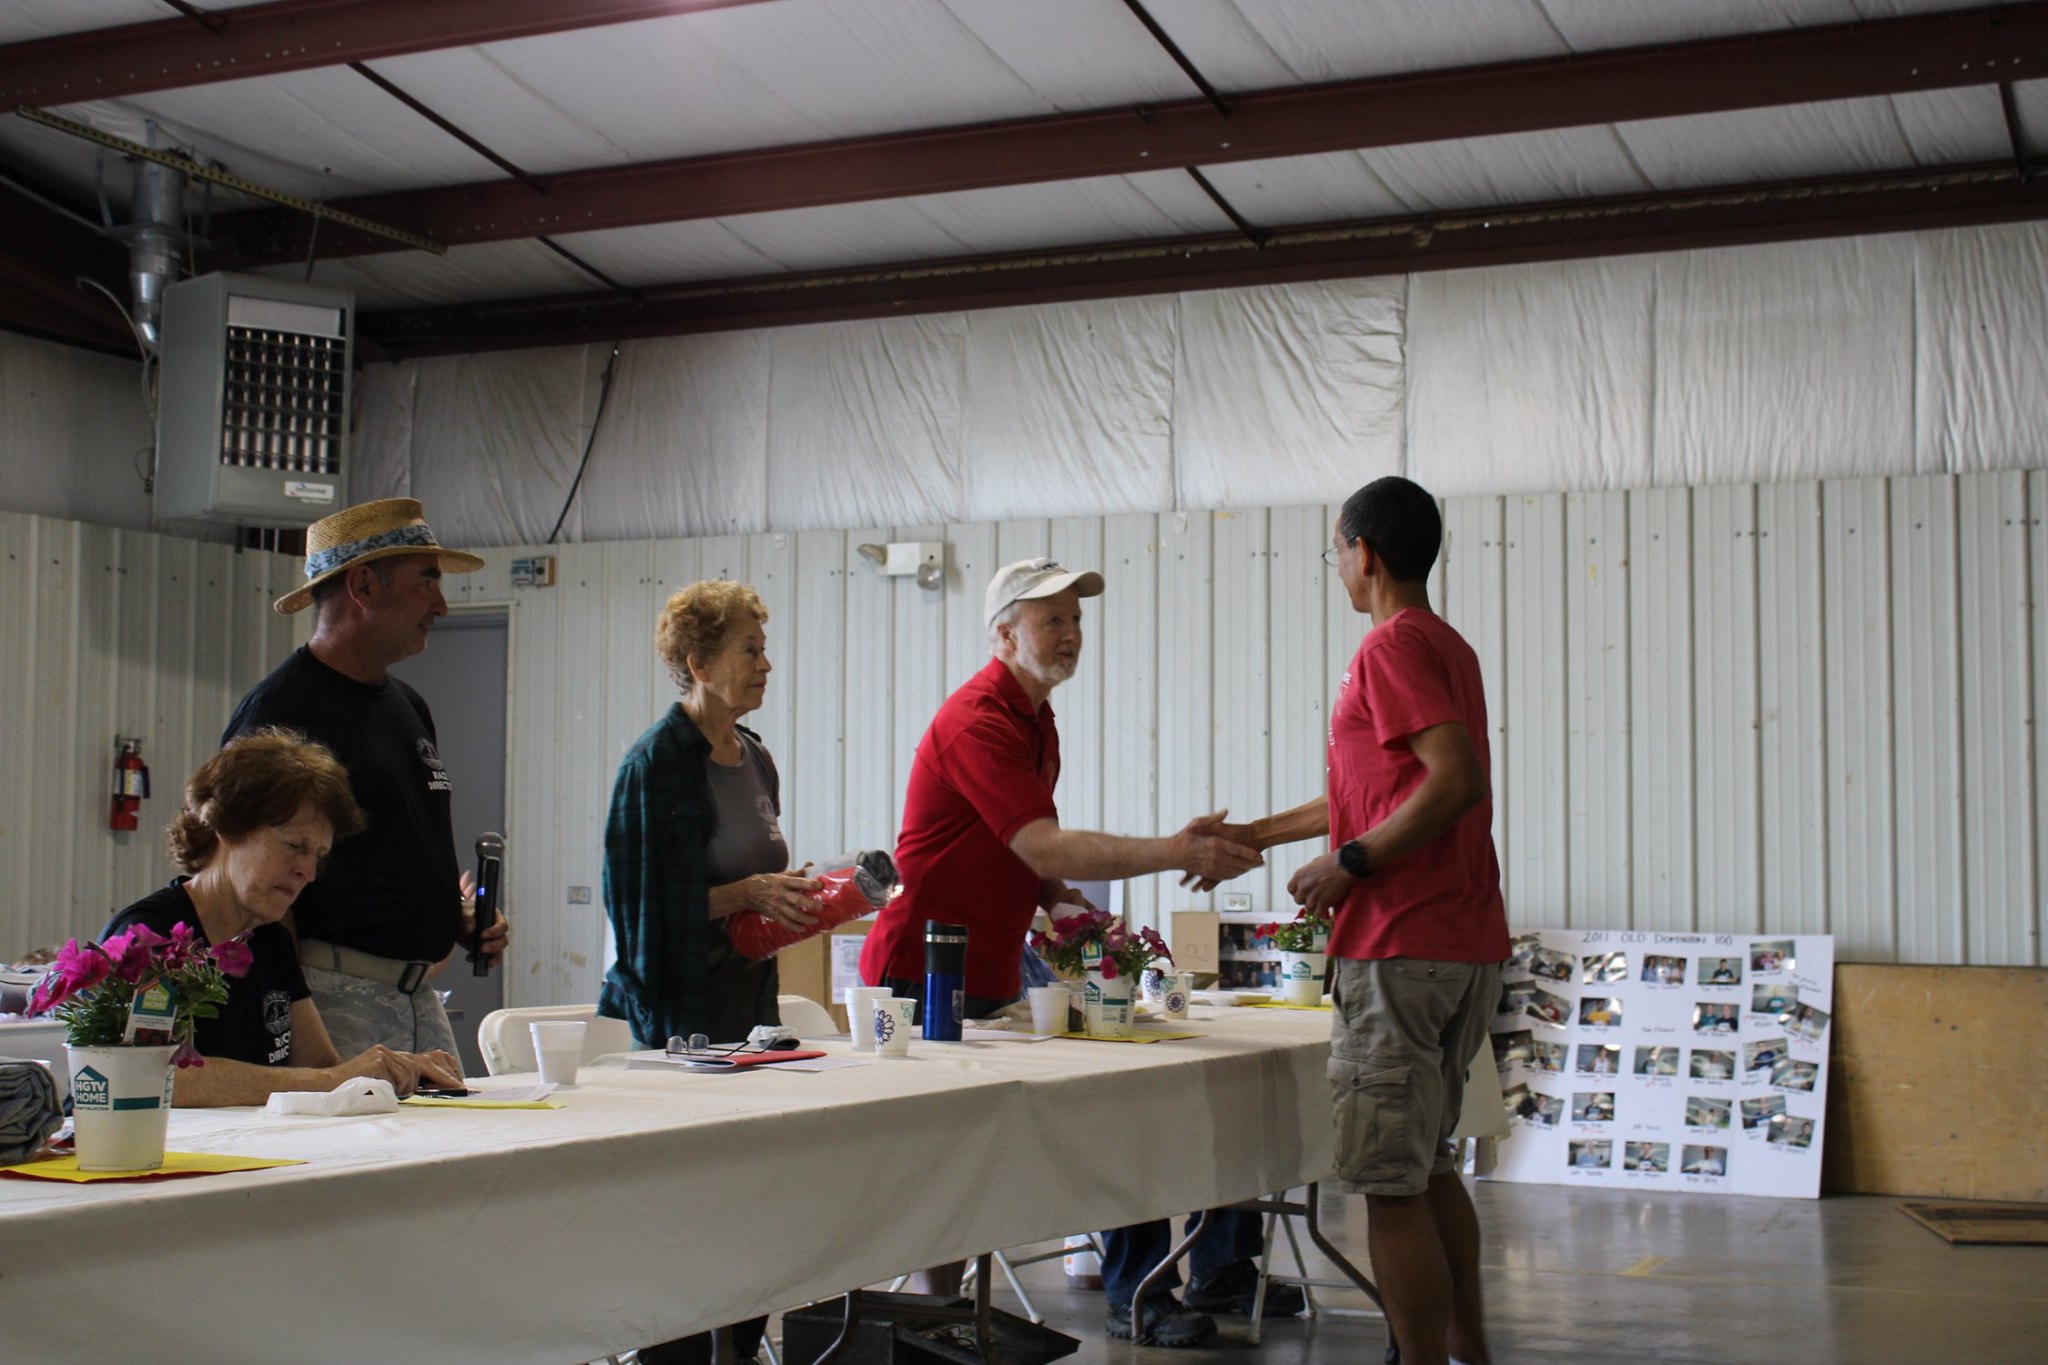 Ed Foley, one of the original finisher, holds the record of most OD finishes, shakes hands with Andres Hernandez. Pat Botts 
          stands next to him, Ray and Wynne Waldron, current RDs at the table also.